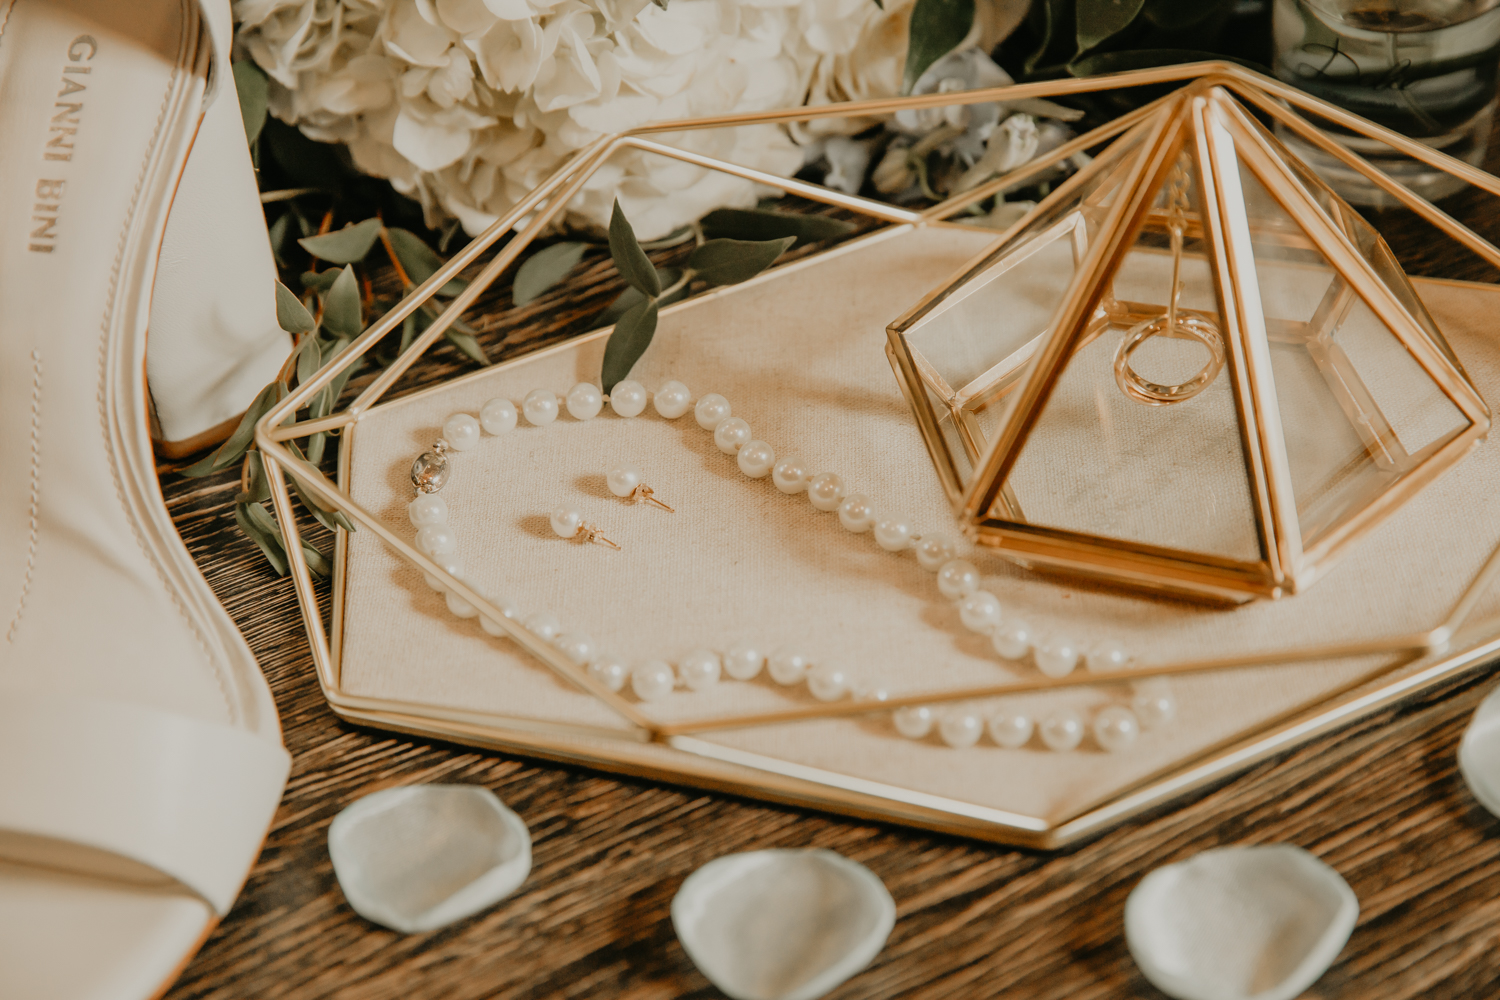 This Image is of a wedding flat lay that features a wedding ring, pearl necklace and pearl earrings.